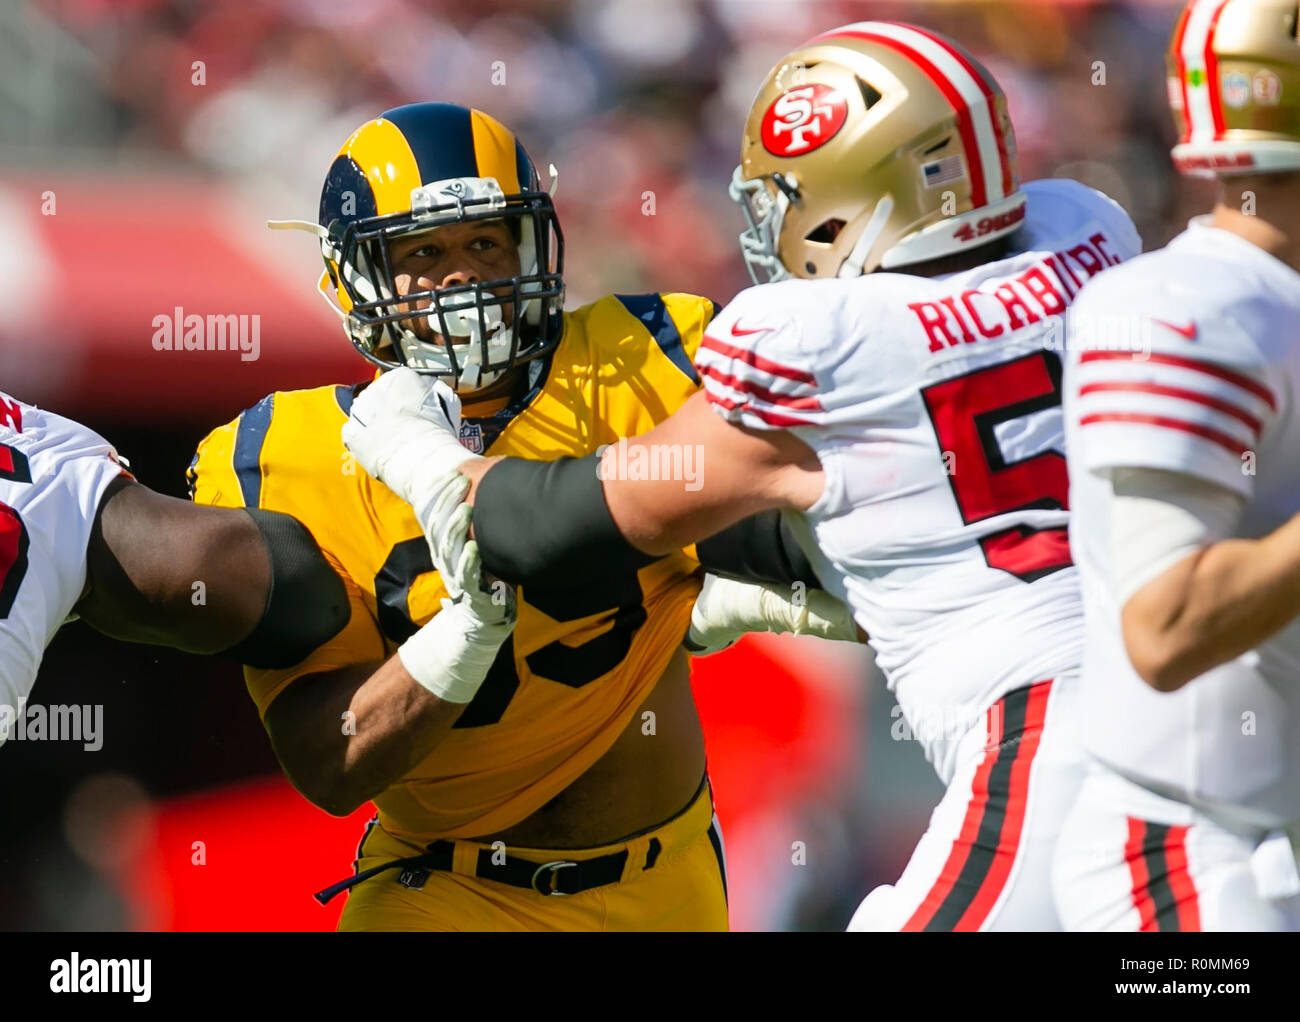 October 21, 2018: Los Angeles Rams defensive tackle Aaron Donald (99) in action during the NFL football game between the Los Angeles Rams and the San Francisco 49ers at Levi's Stadium in Santa Clara, CA. The Rams defeated the 49ers 39-10. Damon Tarver/Cal Sport Media Stock Photo